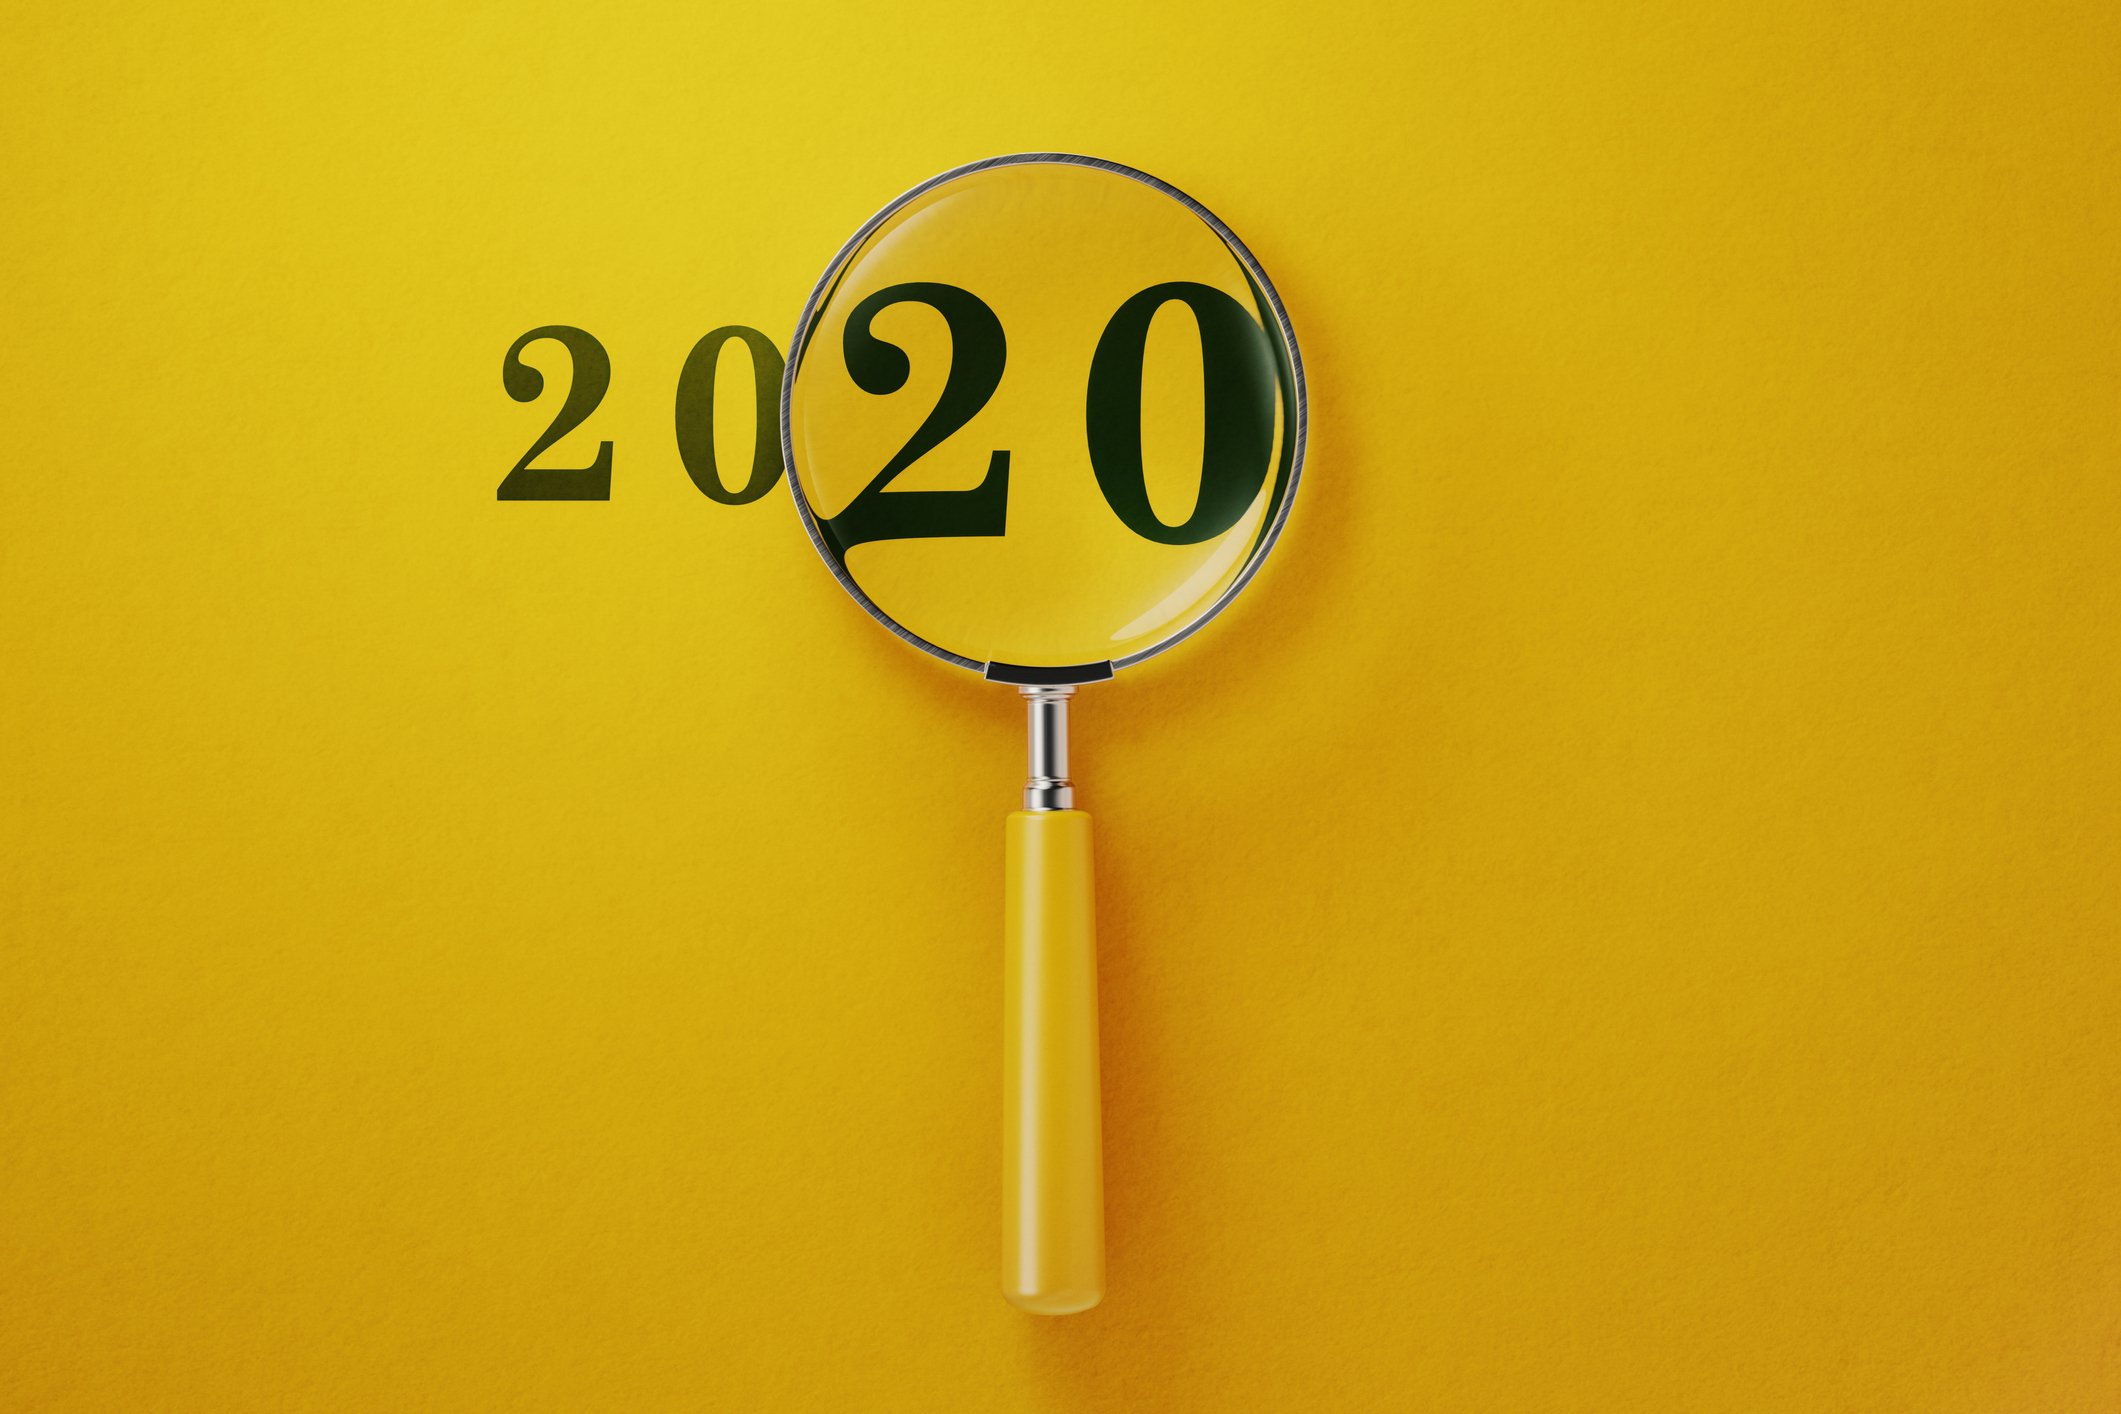 Magnifier And 2020 On Yellow Background